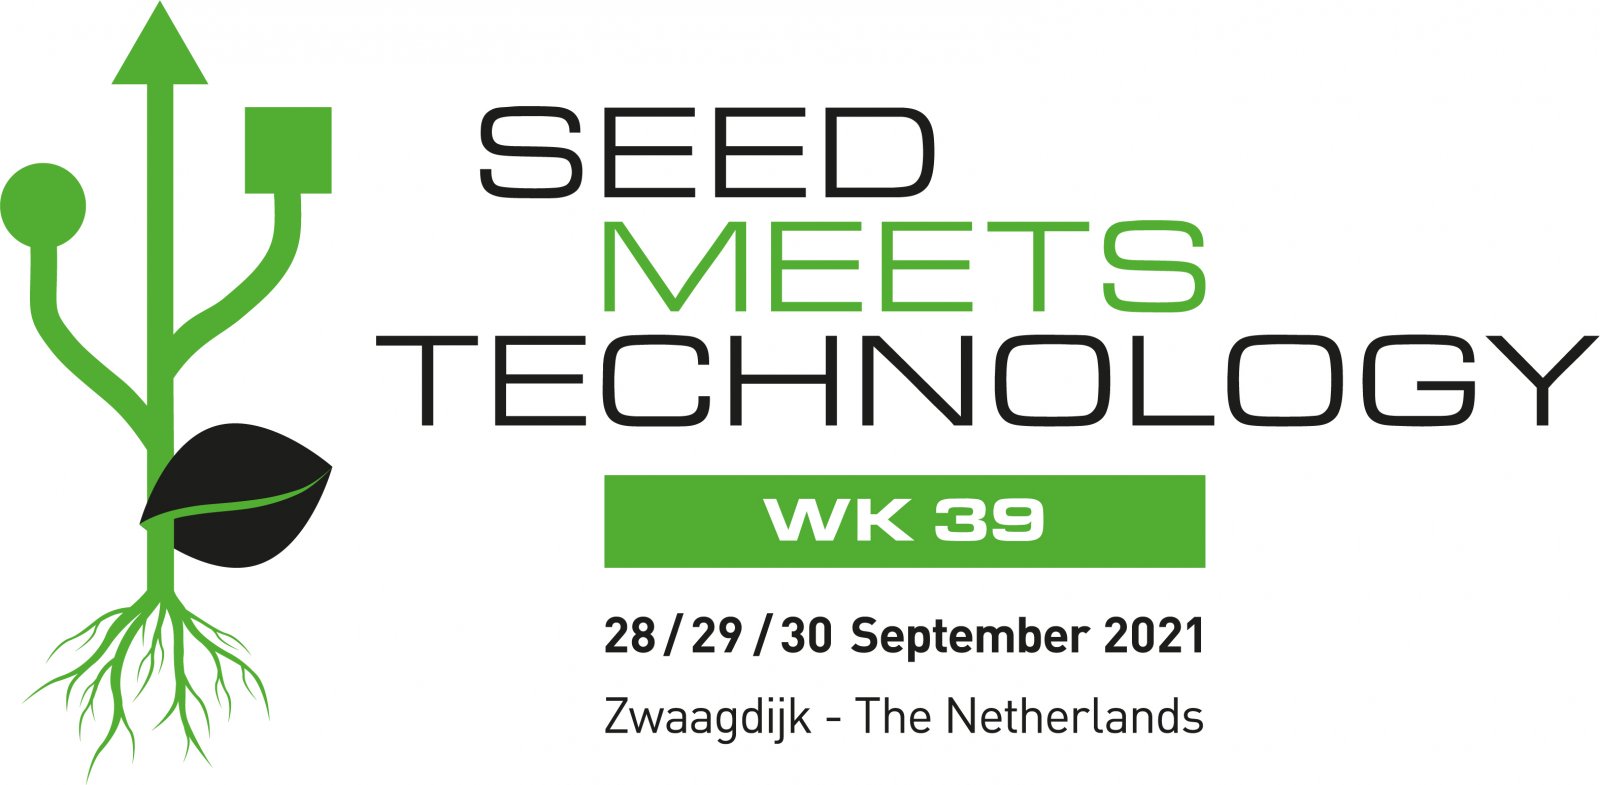 SEED MEETS TECHNOLOGY 2021